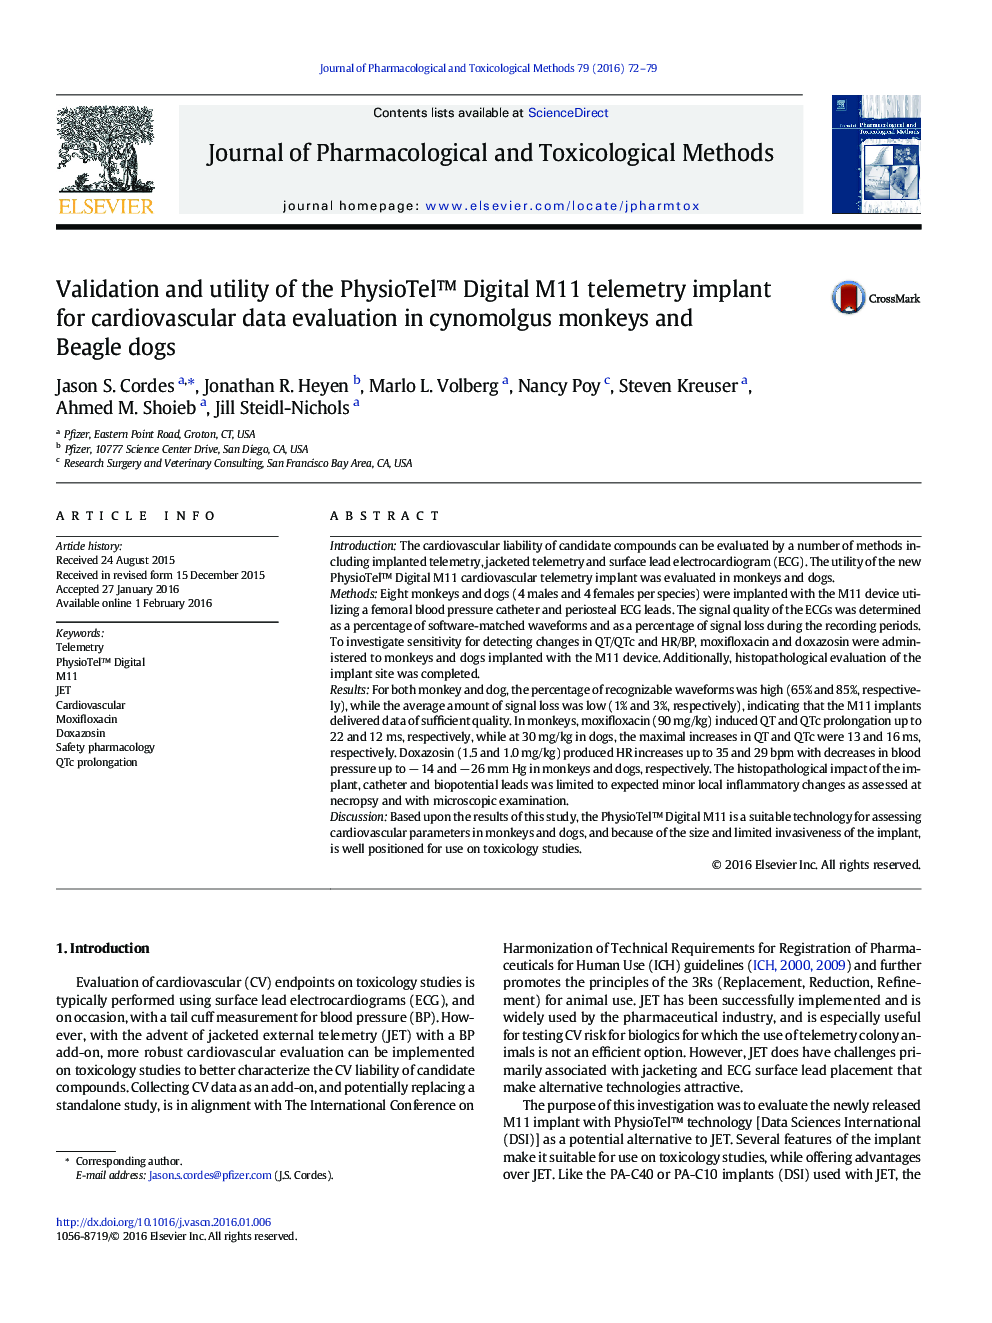 Validation and utility of the PhysioTelâ¢ Digital M11 telemetry implant for cardiovascular data evaluation in cynomolgus monkeys and Beagle dogs